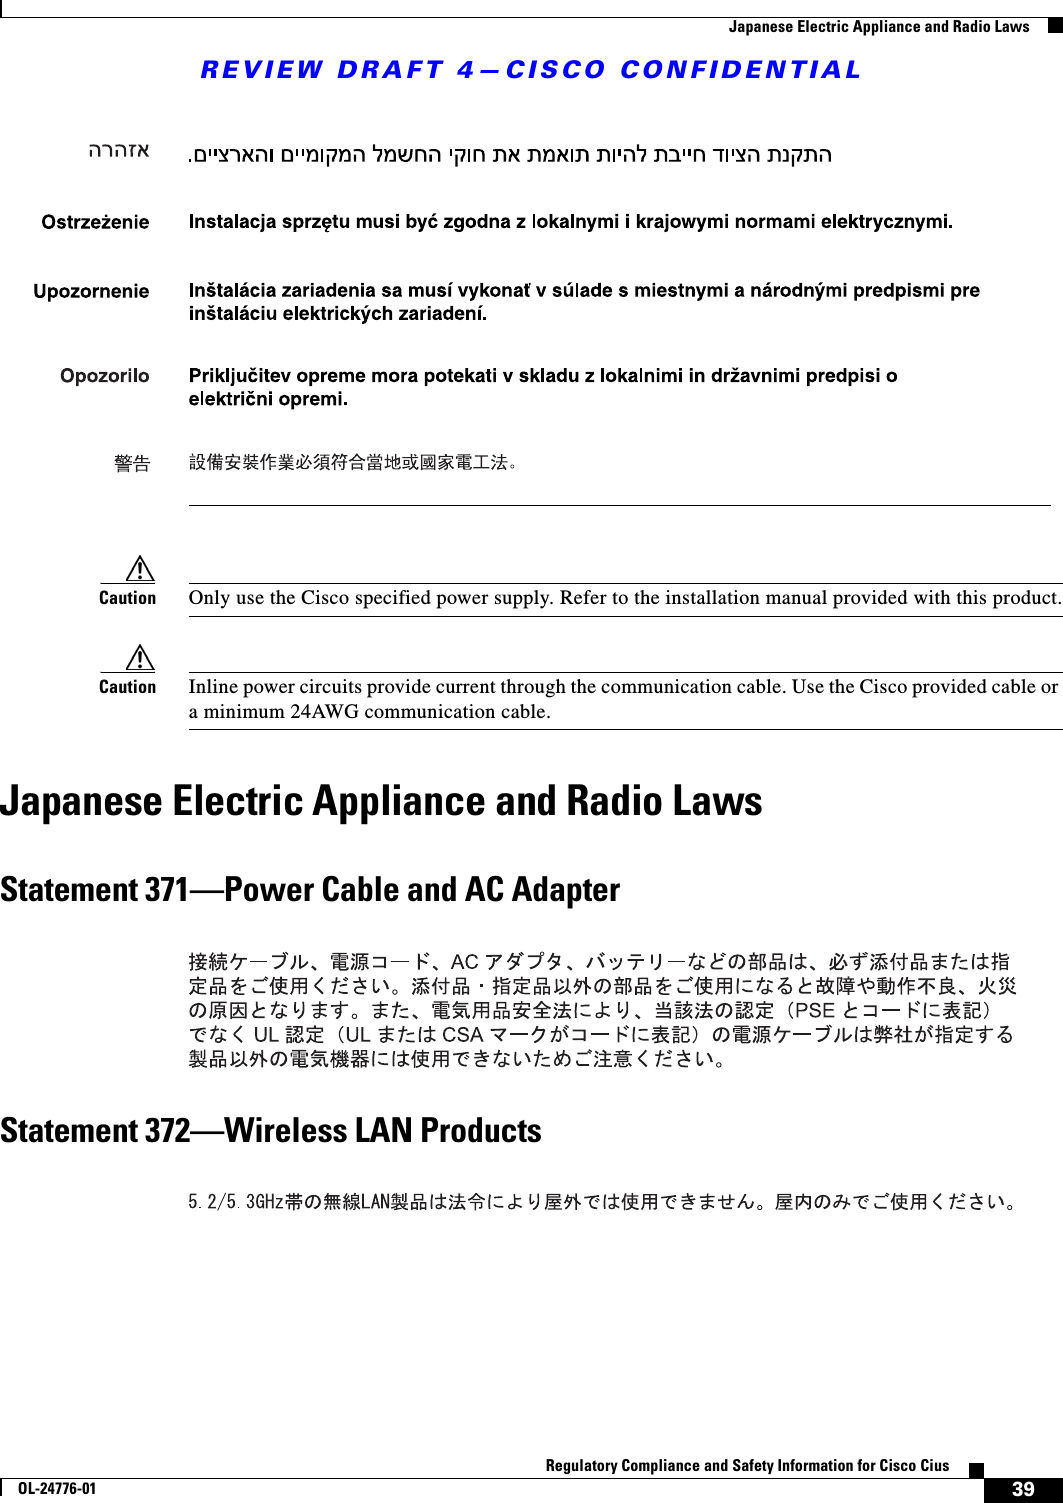 REVIEW DRAFT 4—CISCO CONFIDENTIAL39Regulatory Compliance and Safety Information for Cisco CiusOL-24776-01  Japanese Electric Appliance and Radio LawsCaution Only use the Cisco specified power supply. Refer to the installation manual provided with this product.Caution Inline power circuits provide current through the communication cable. Use the Cisco provided cable or a minimum 24AWG communication cable. Japanese Electric Appliance and Radio LawsStatement 371—Power Cable and AC AdapterStatement 372—Wireless LAN Products